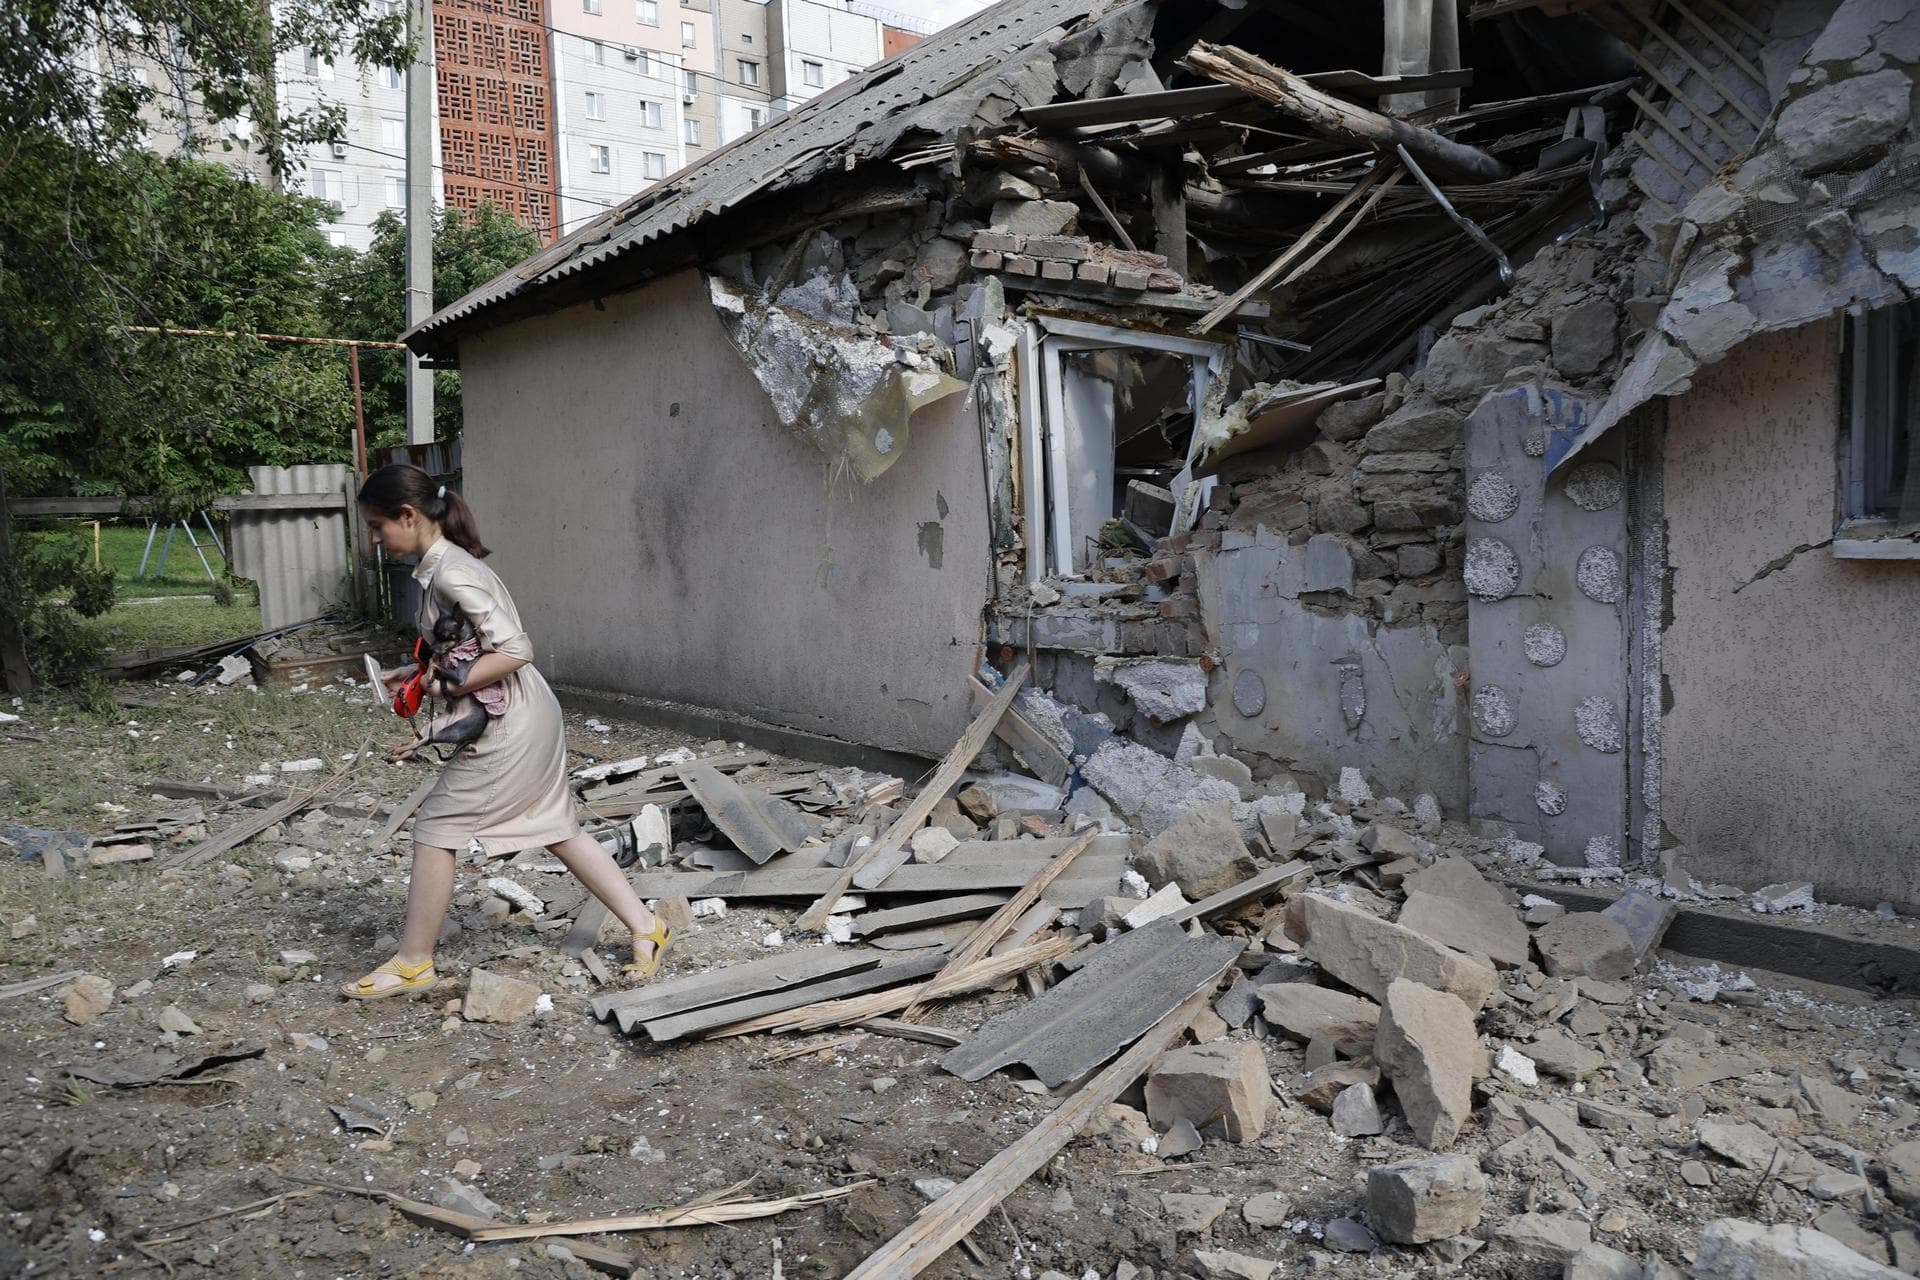 A girl carries a dog as she walks past a house damaged from shelling in Donetsk